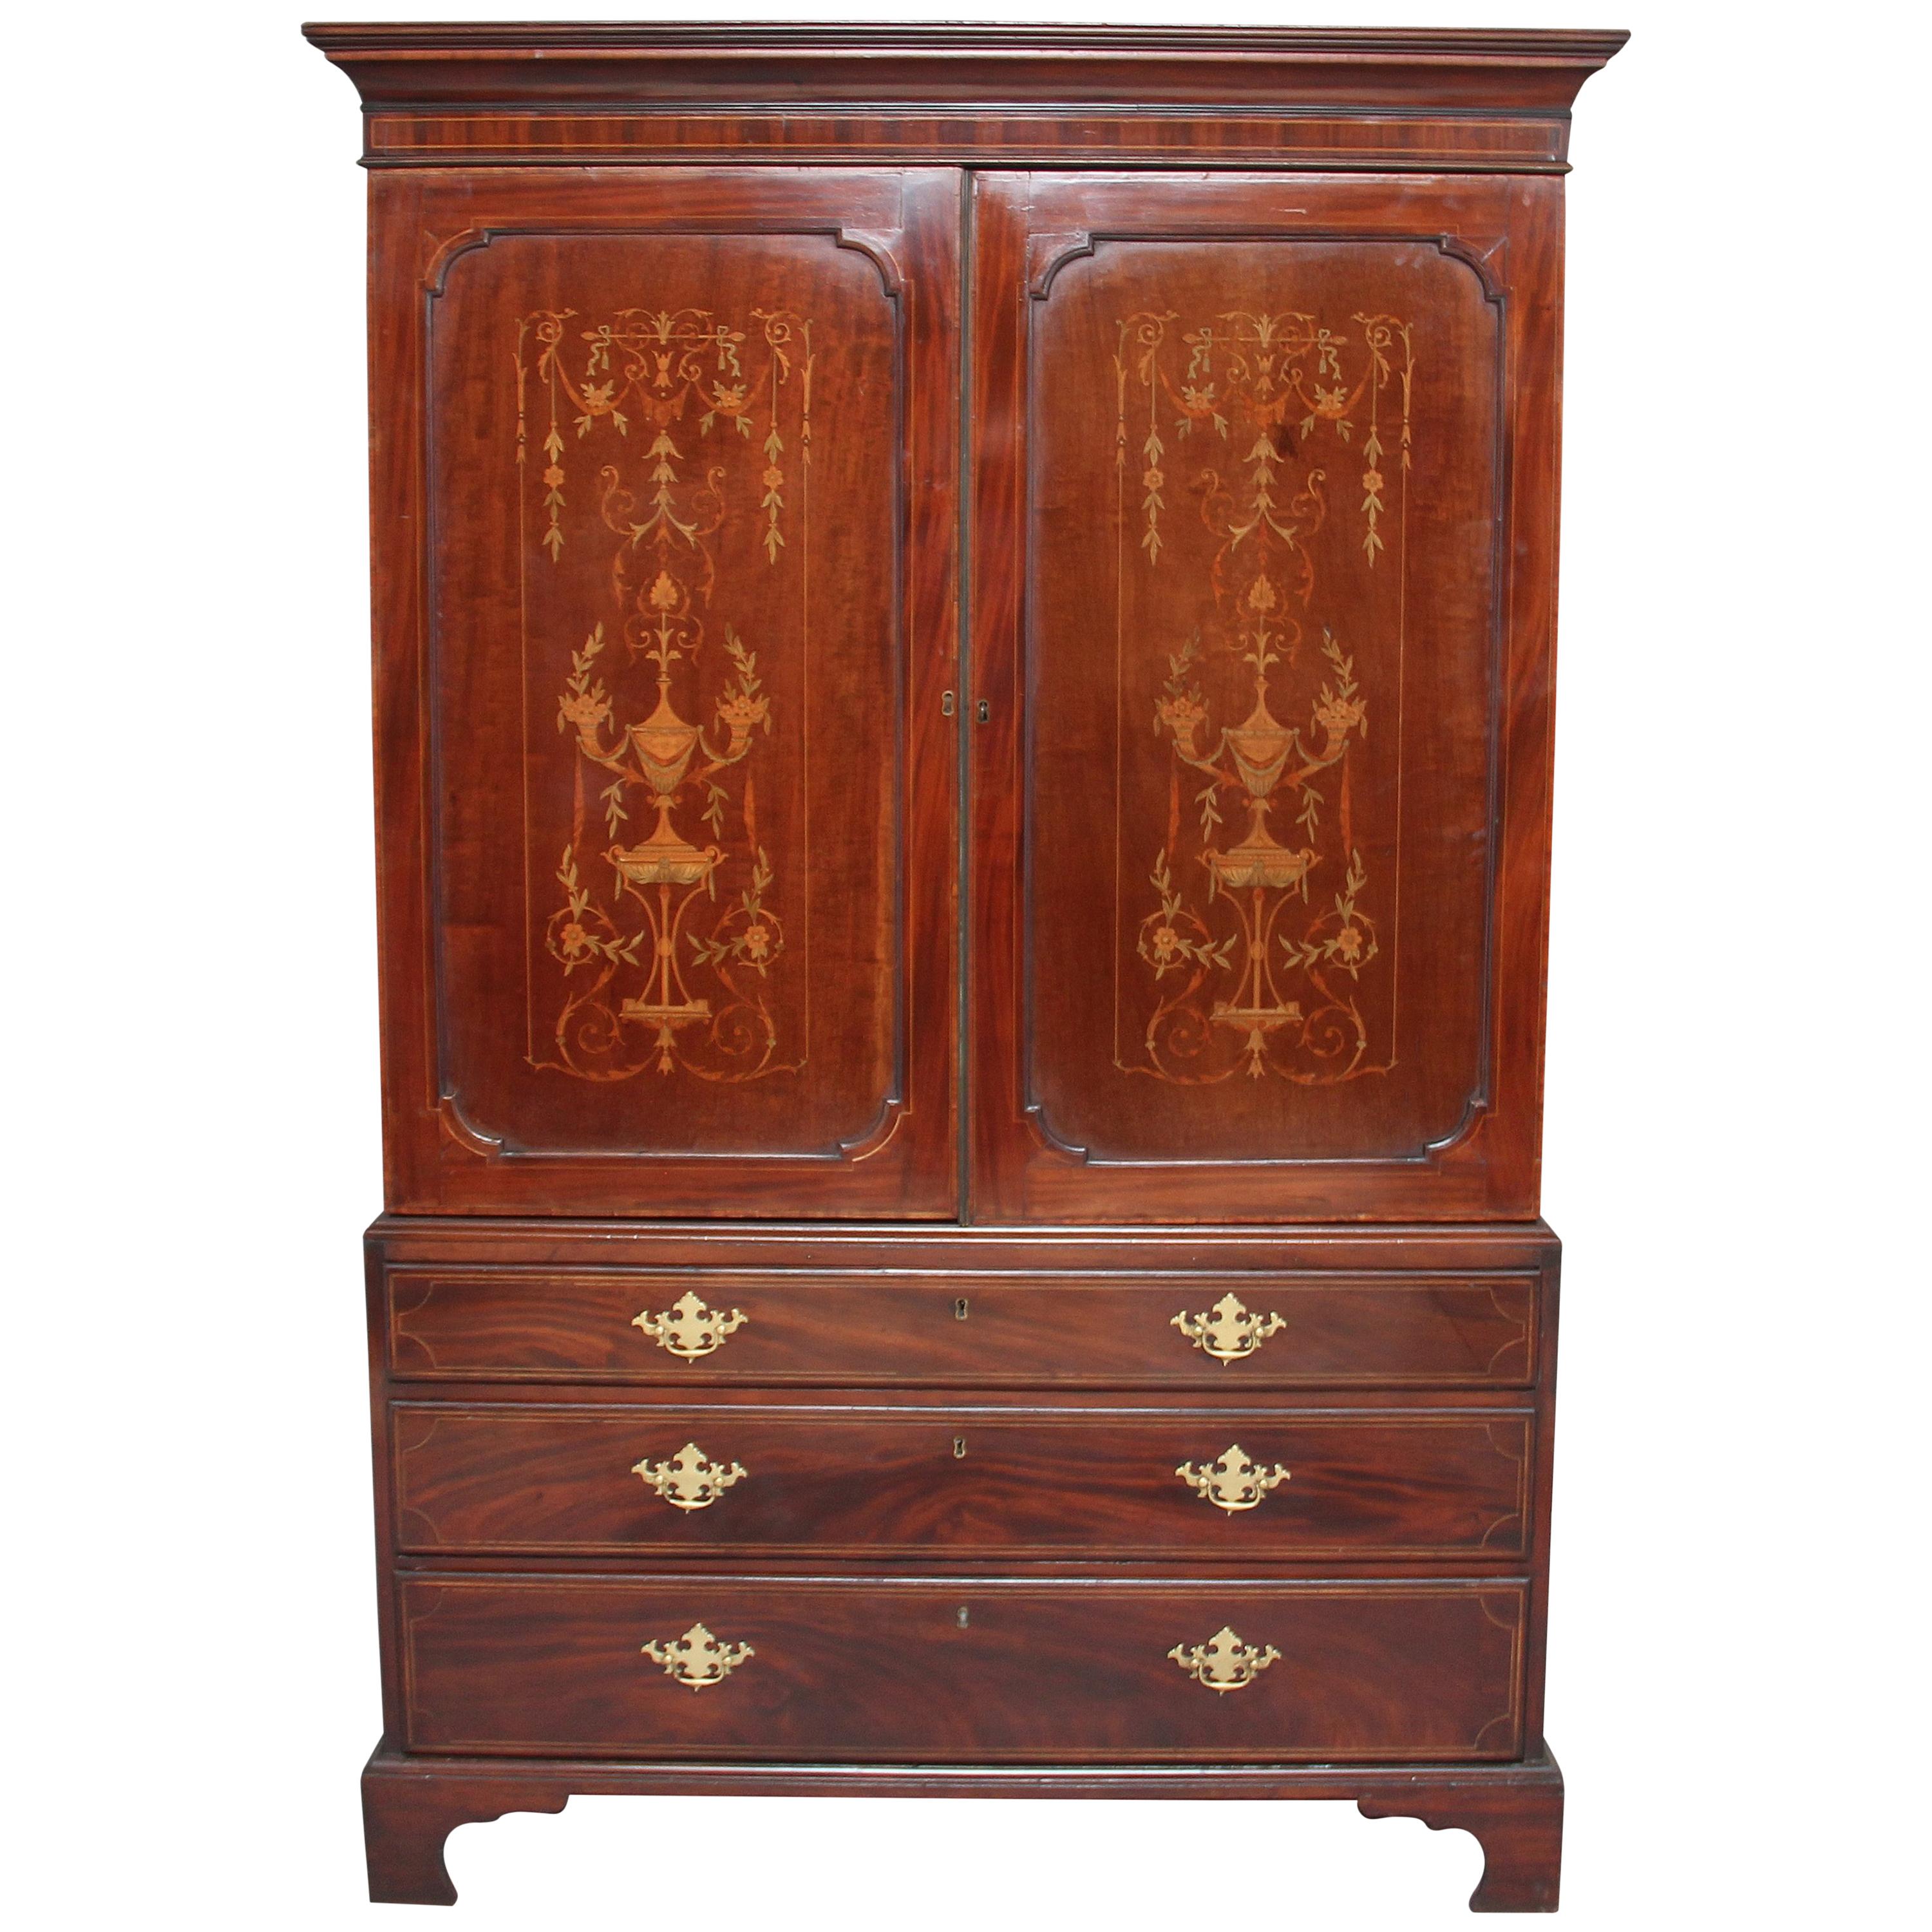 Early 19th Century Mahogany and Inlaid Press Cupboard